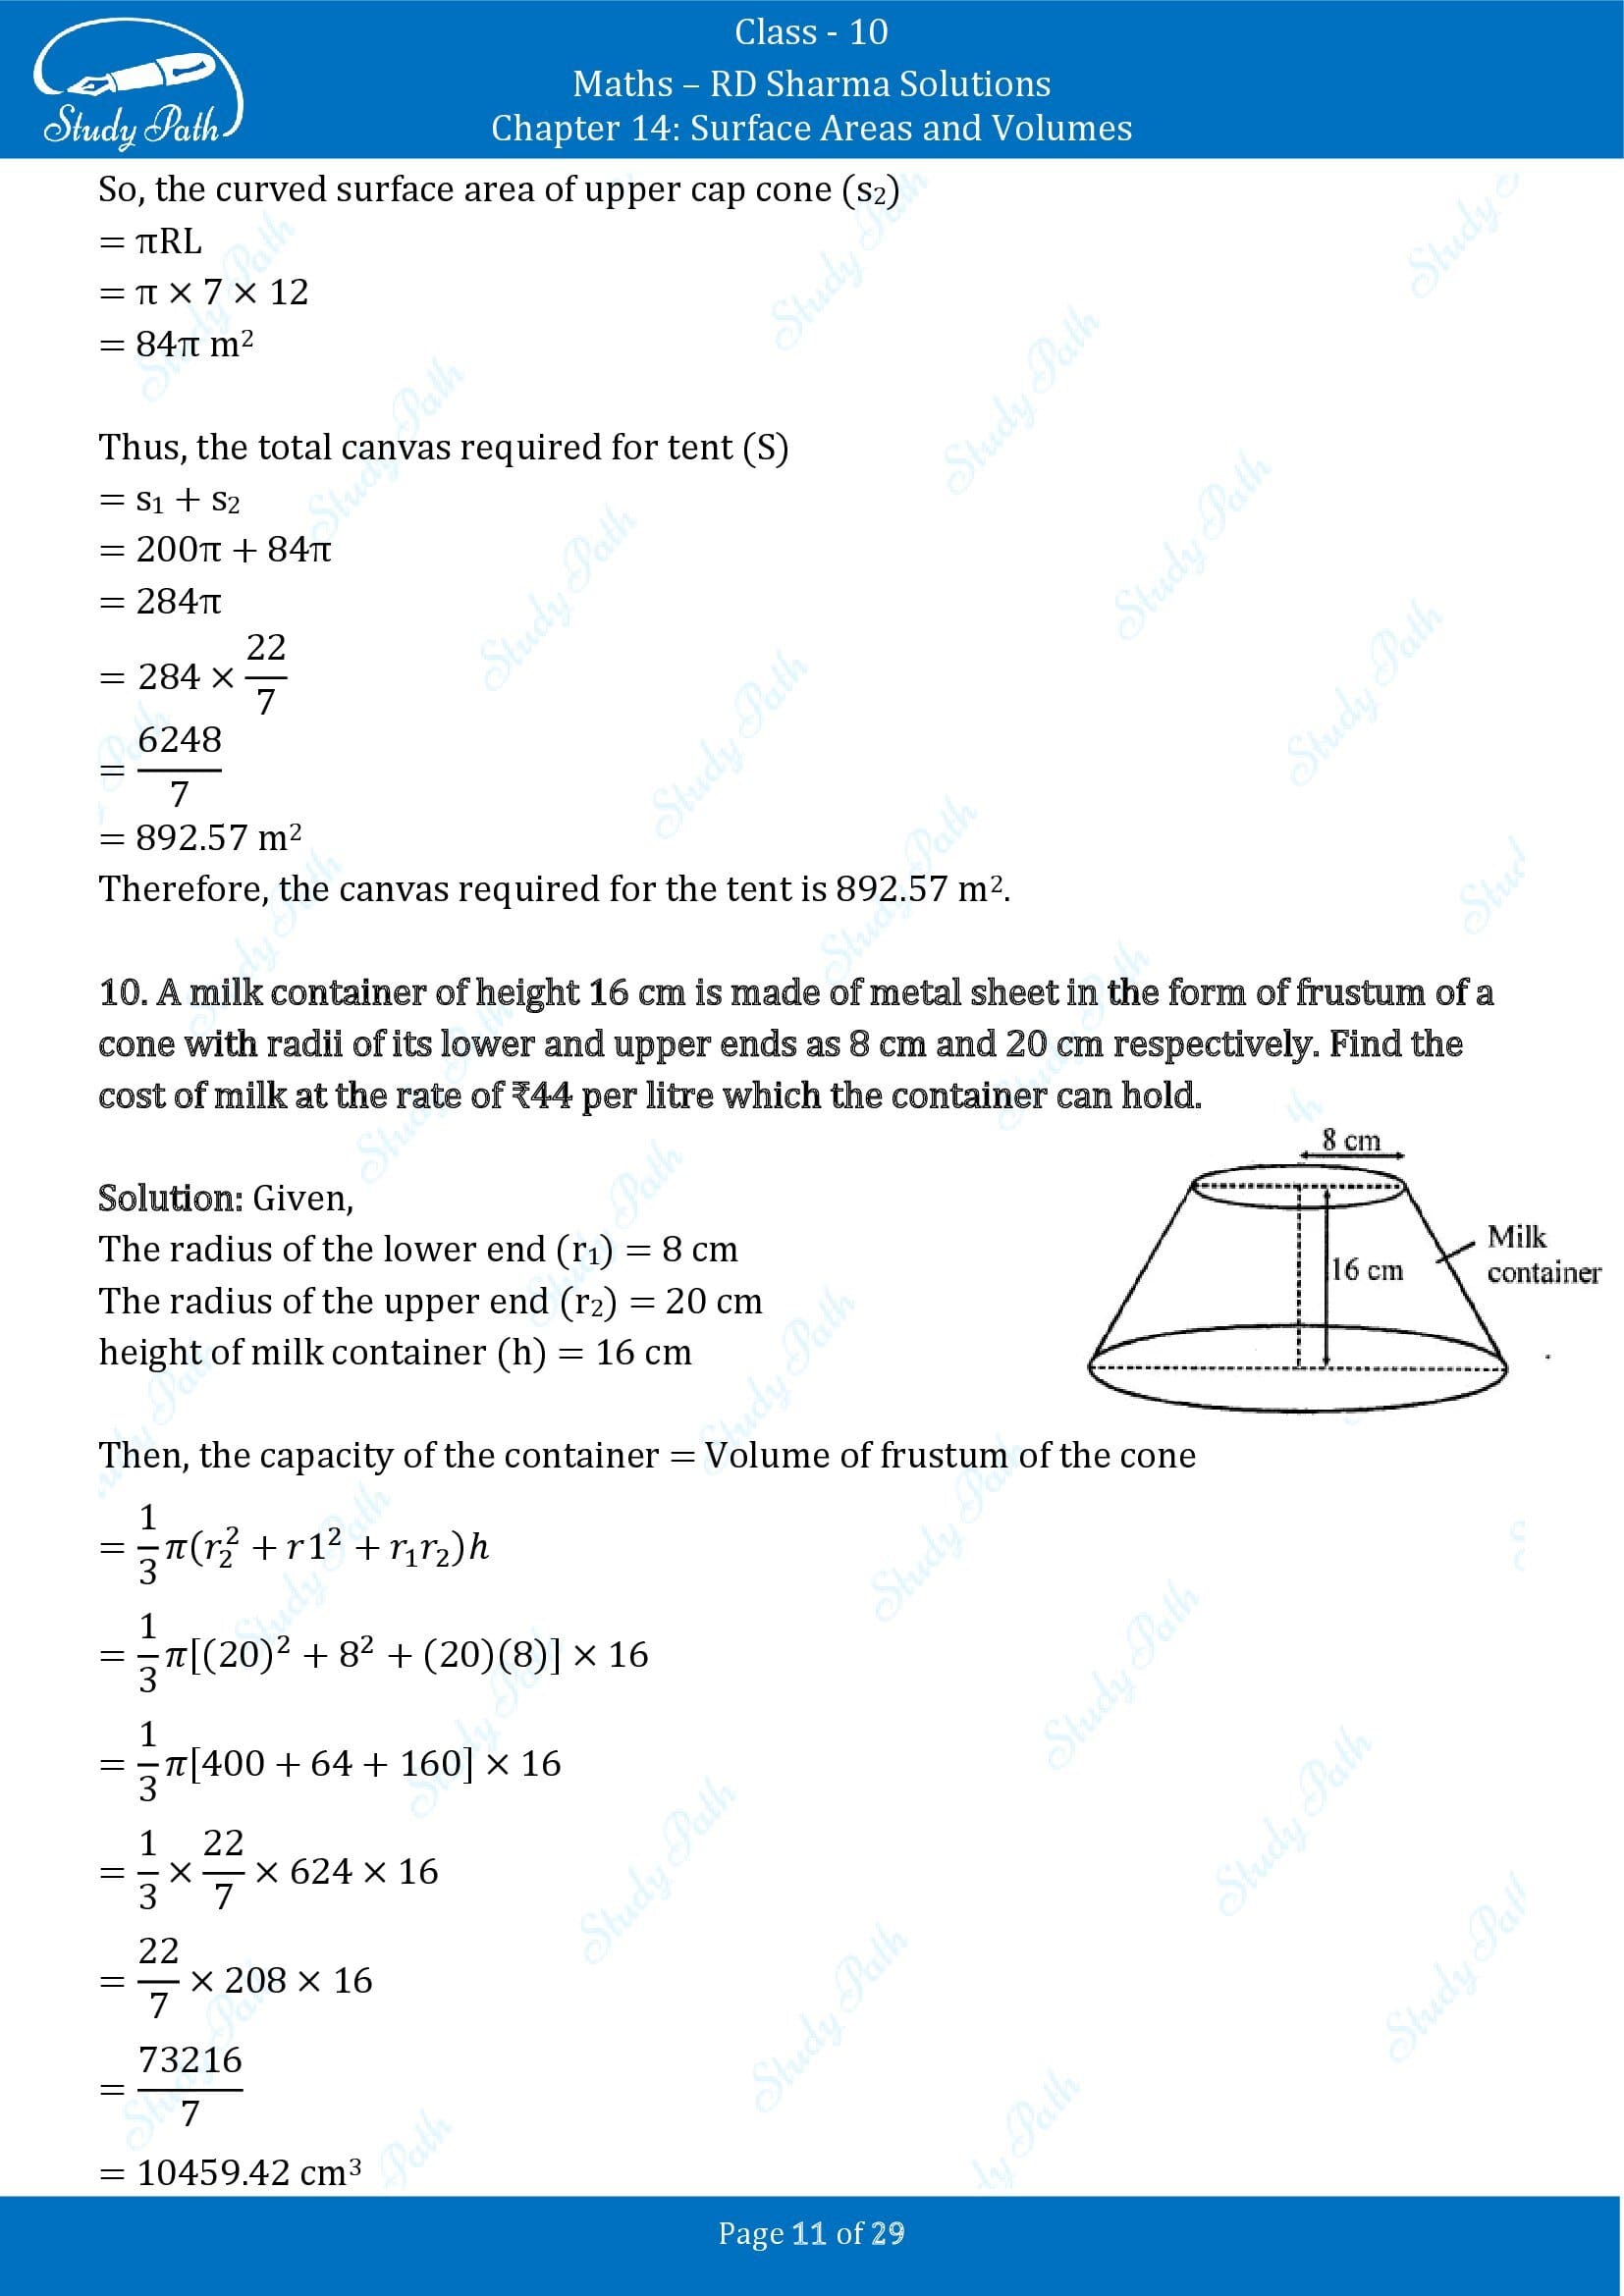 RD Sharma Solutions Class 10 Chapter 14 Surface Areas and Volumes Exercise 14.3 00011